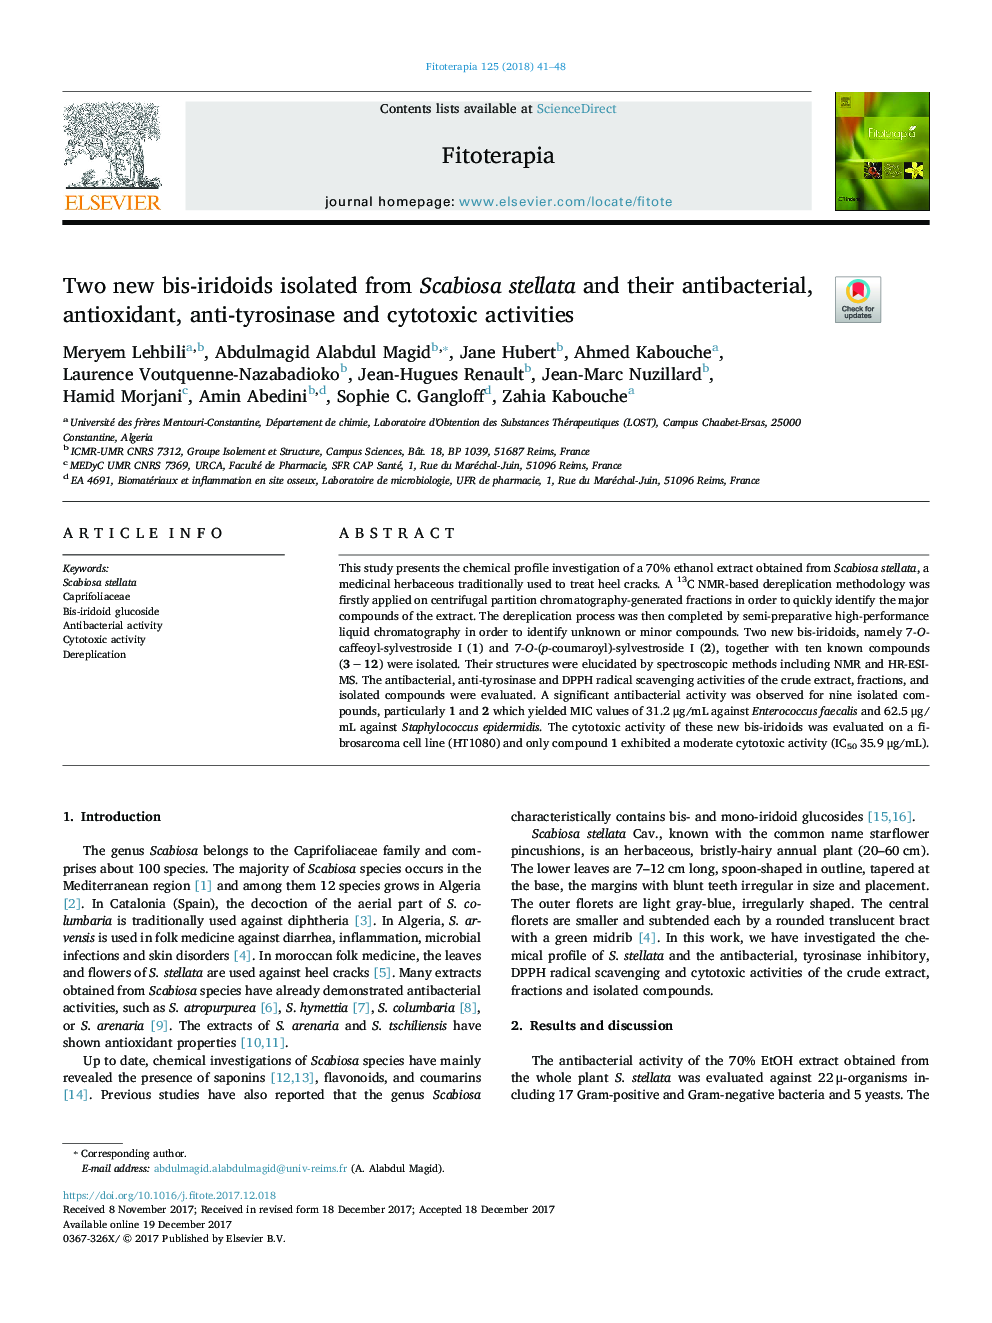 Two new bis-iridoids isolated from Scabiosa stellata and their antibacterial, antioxidant, anti-tyrosinase and cytotoxic activities